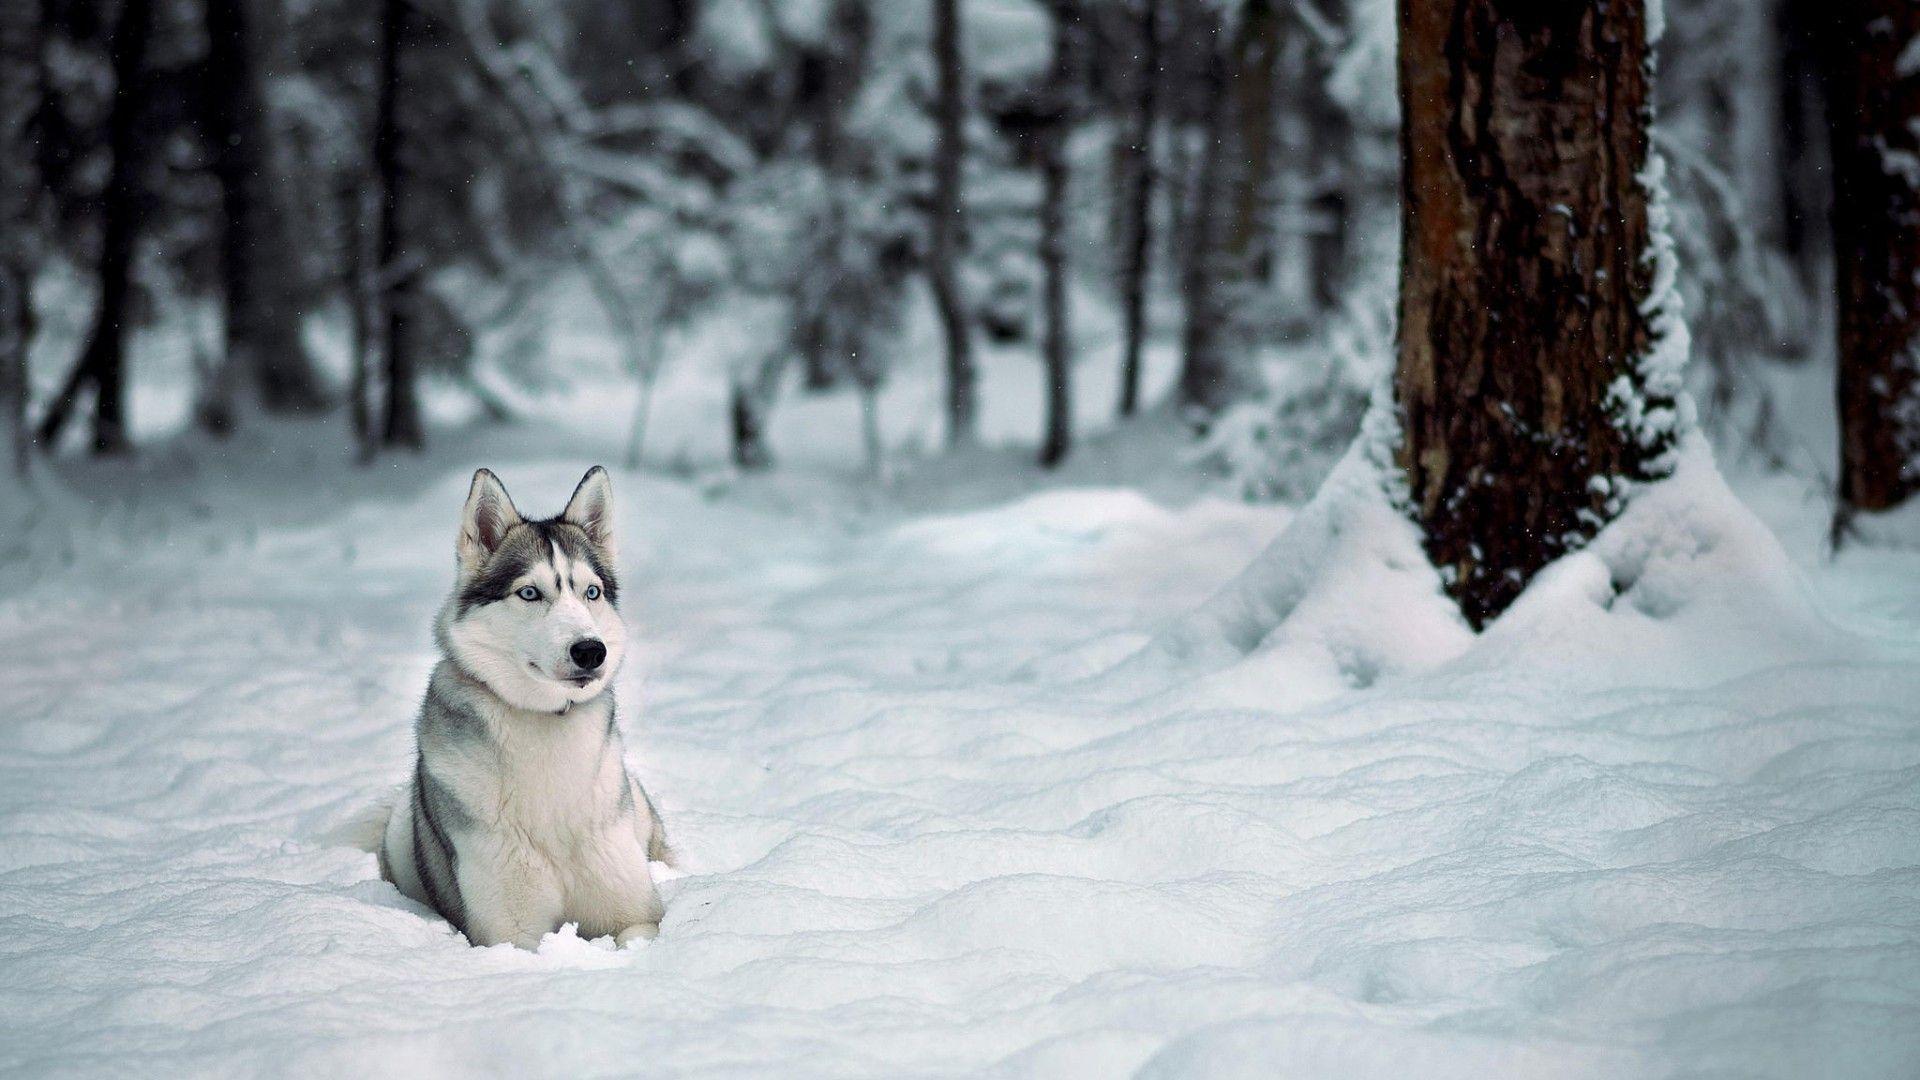 Husky Dog In Snow Forest Wallpaper